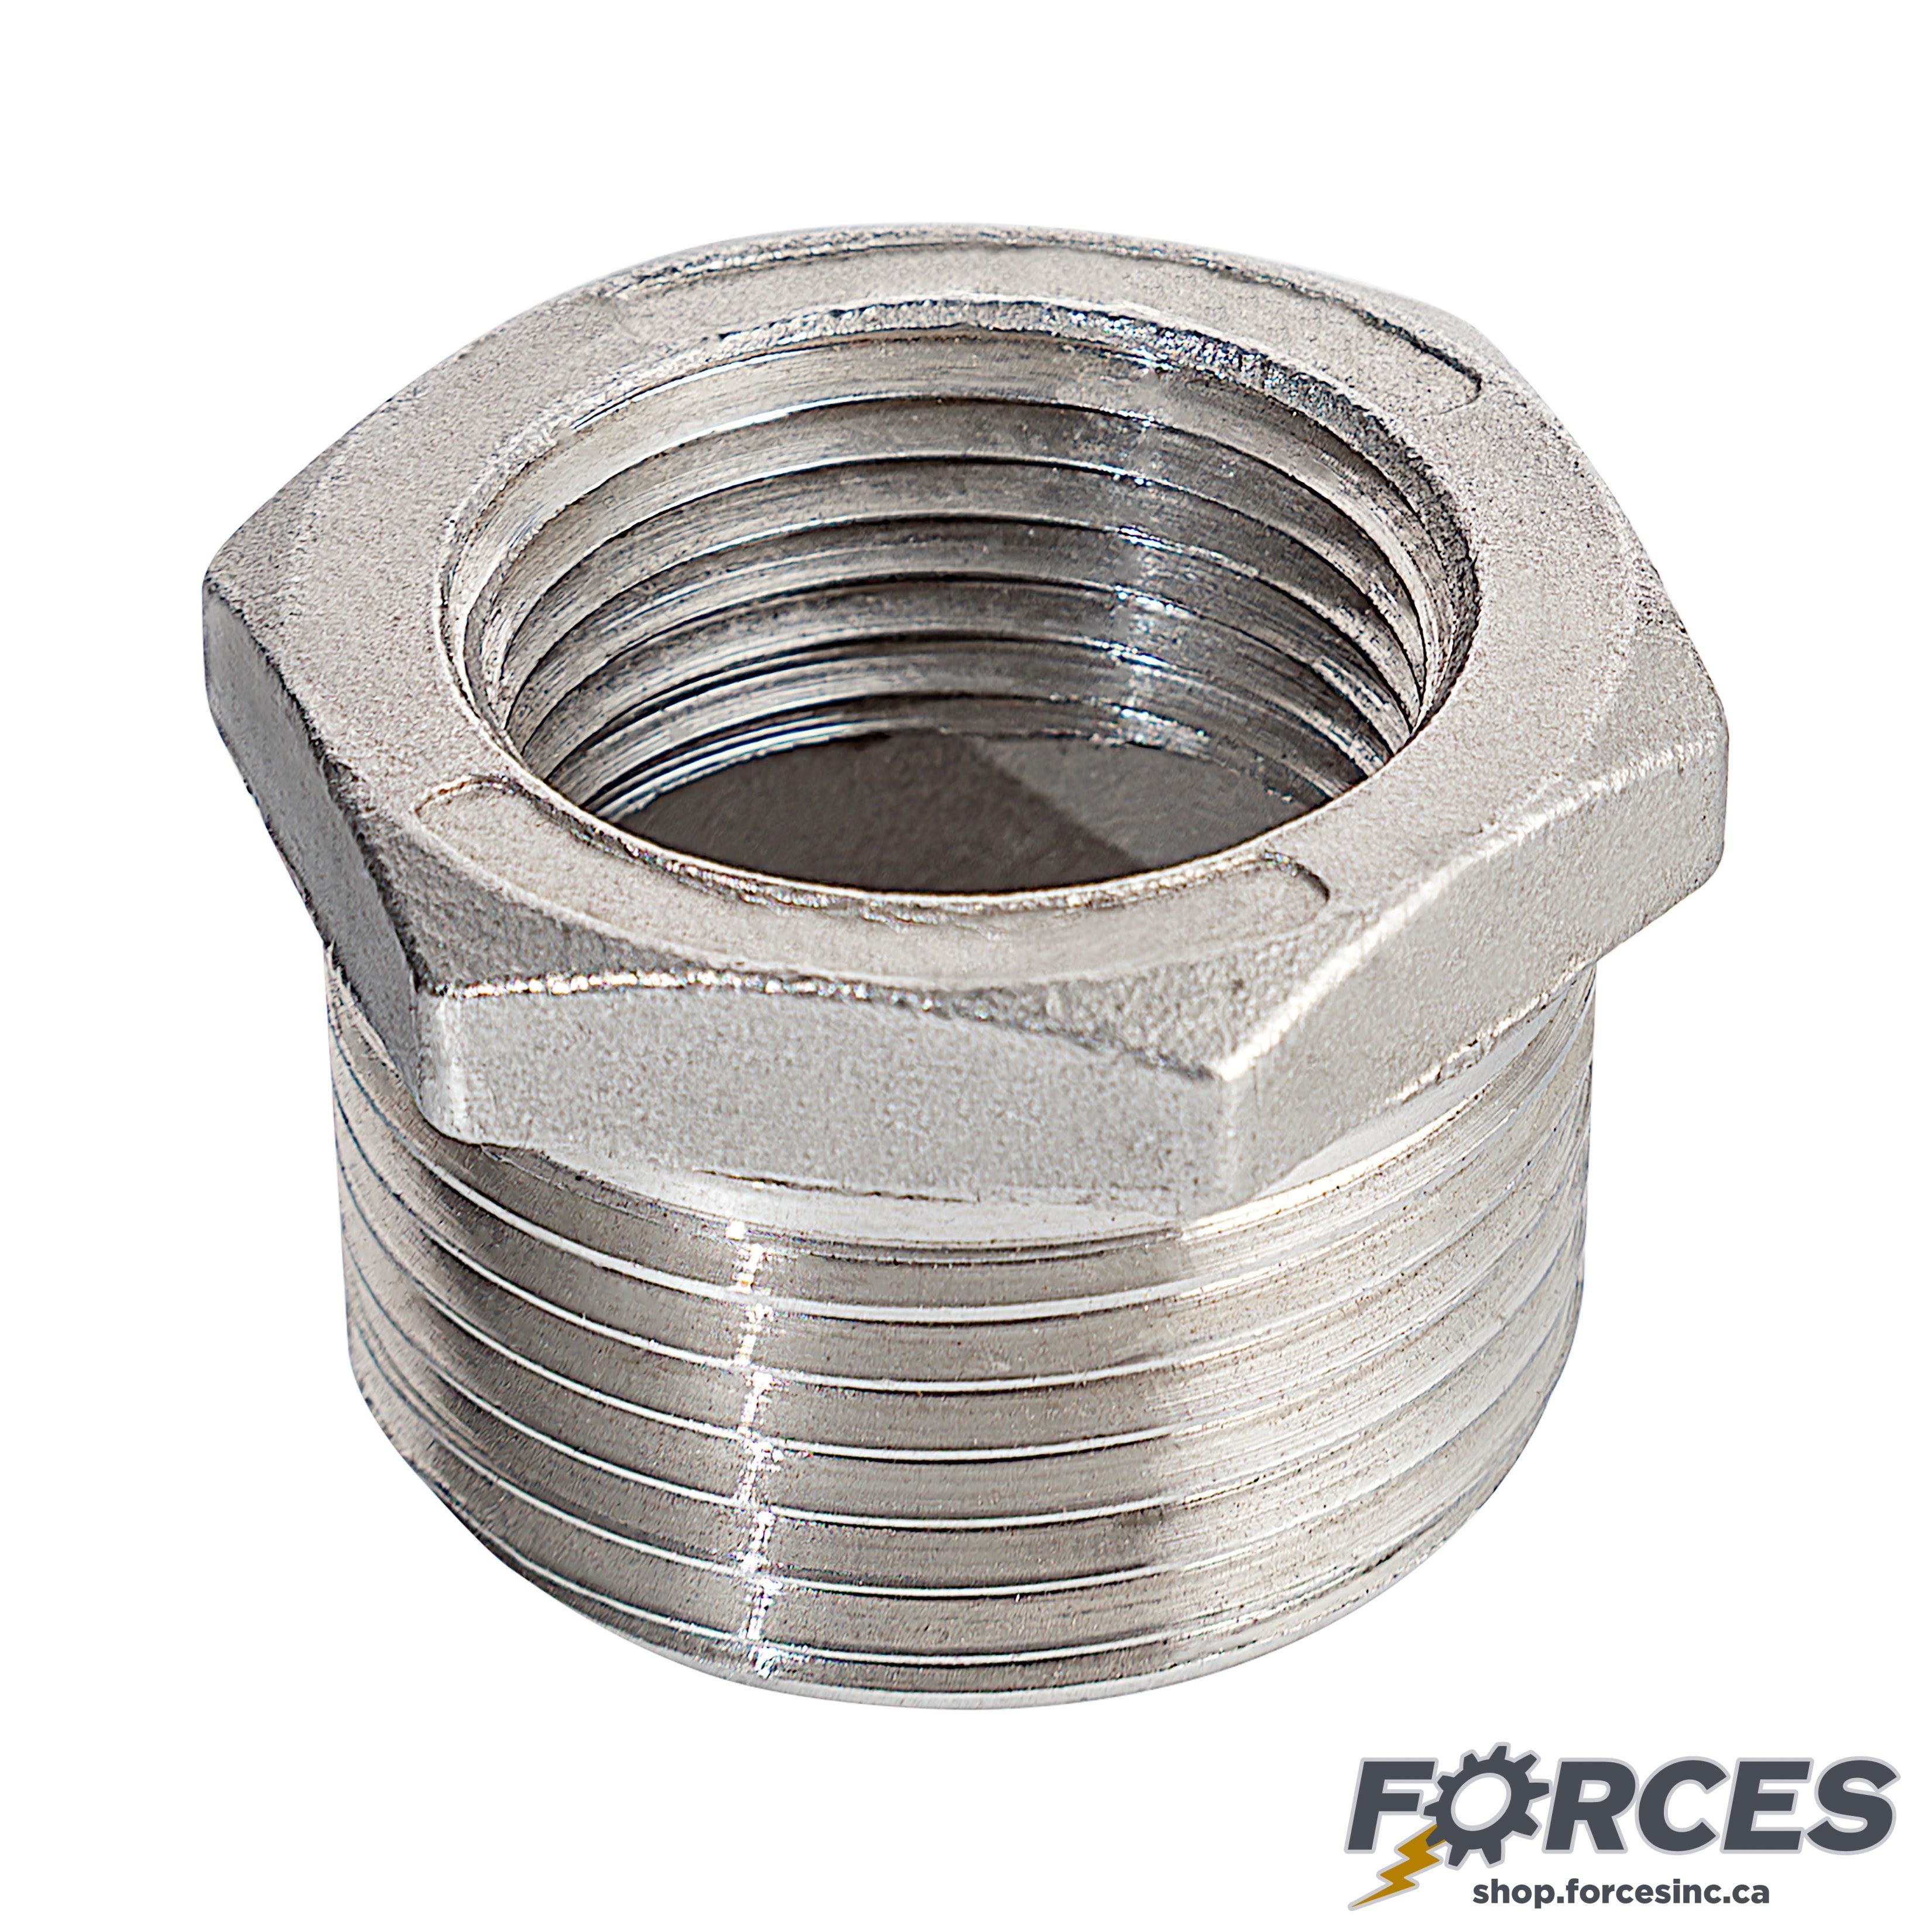 2" (M) x 1/2" (F) Reducing Hex Bushing NPT #150 - Stainless Steel 316 - Forces Inc